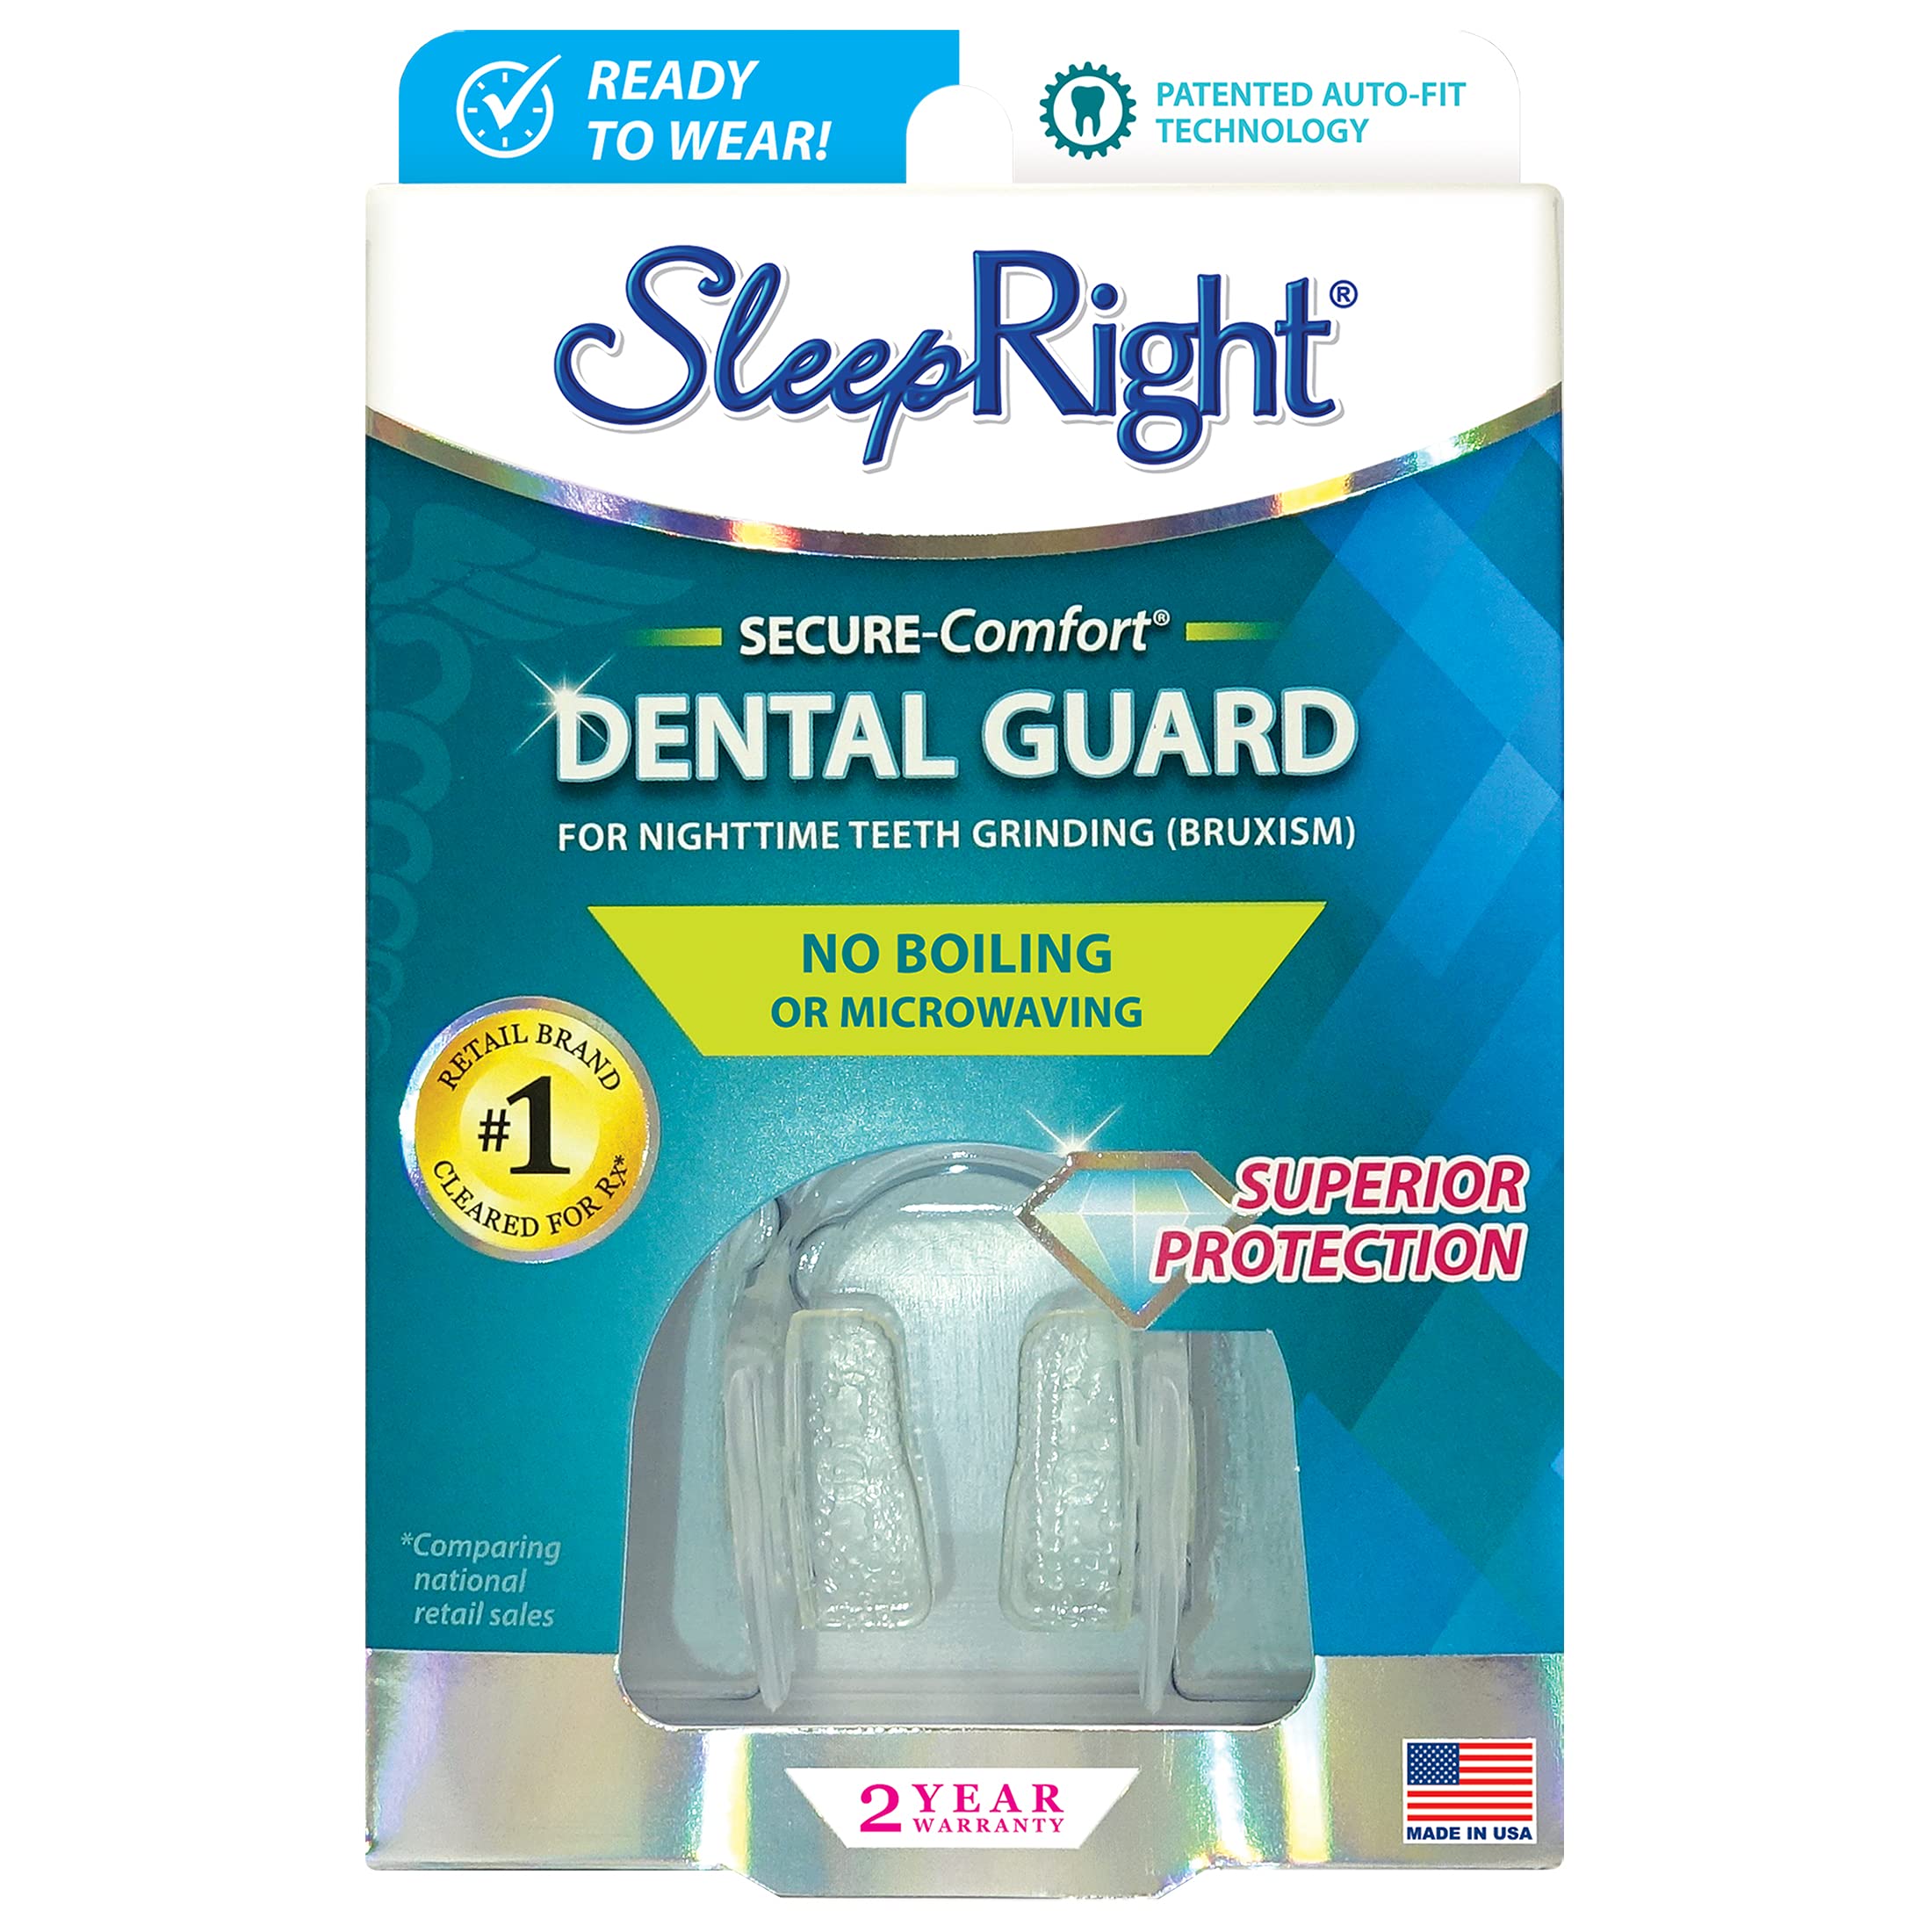 SleepRight Secure-Comfort Dental Guard Mouth Guard To Prevent Teeth Grinding SleepRight No Boil Dental Guard